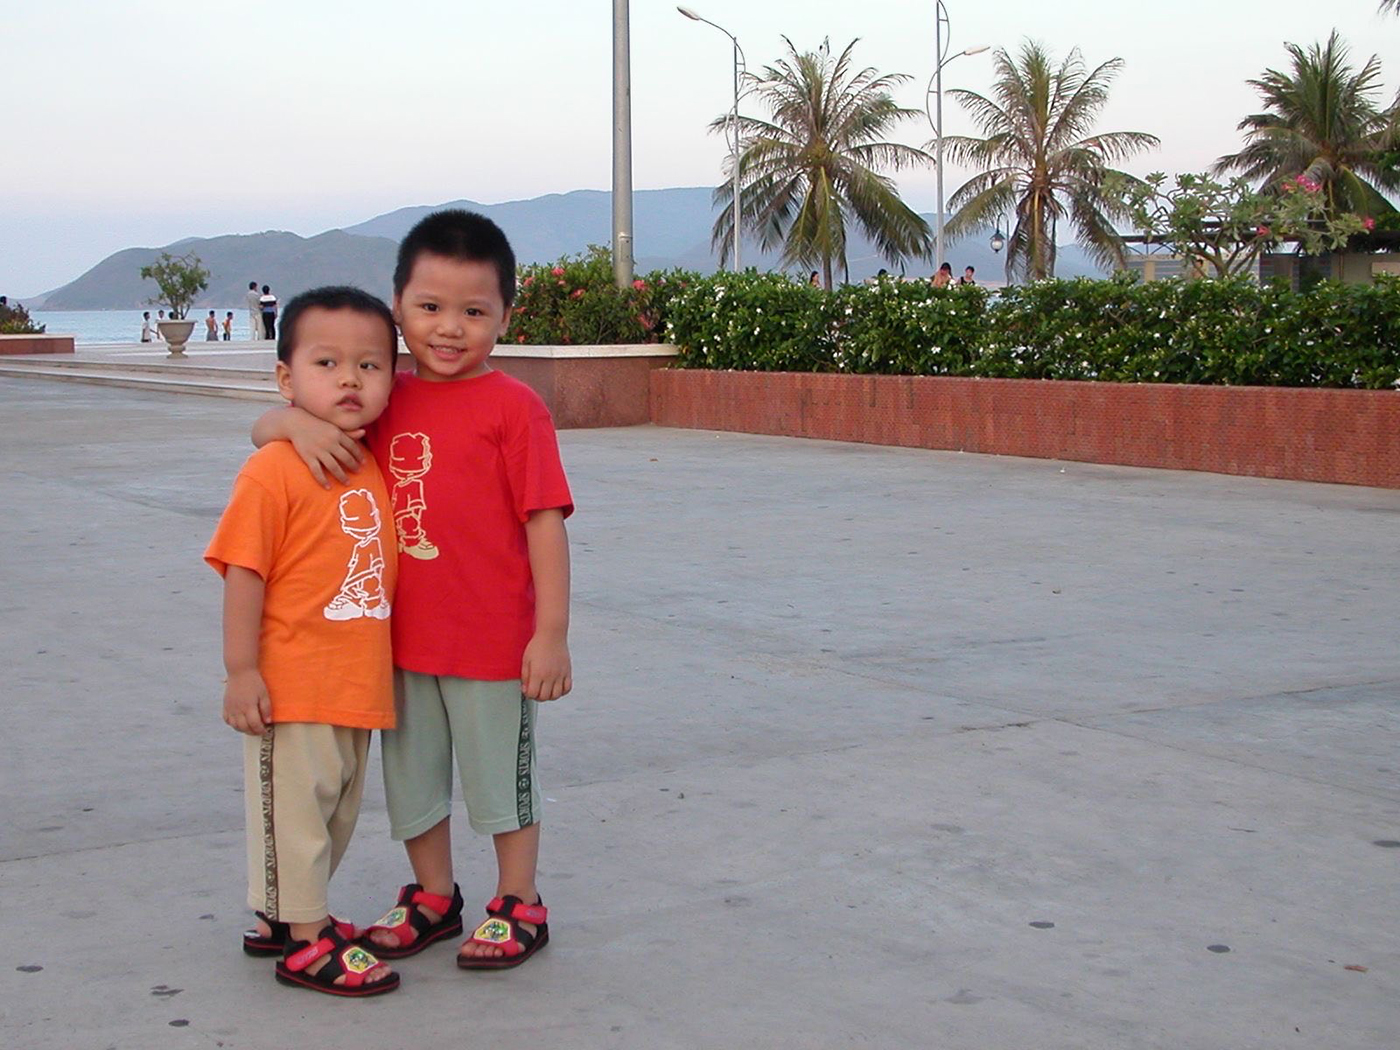 Henry and Kyle Nguyen, who has one arm draped over his brother's shoulder, standing on a pier as young children